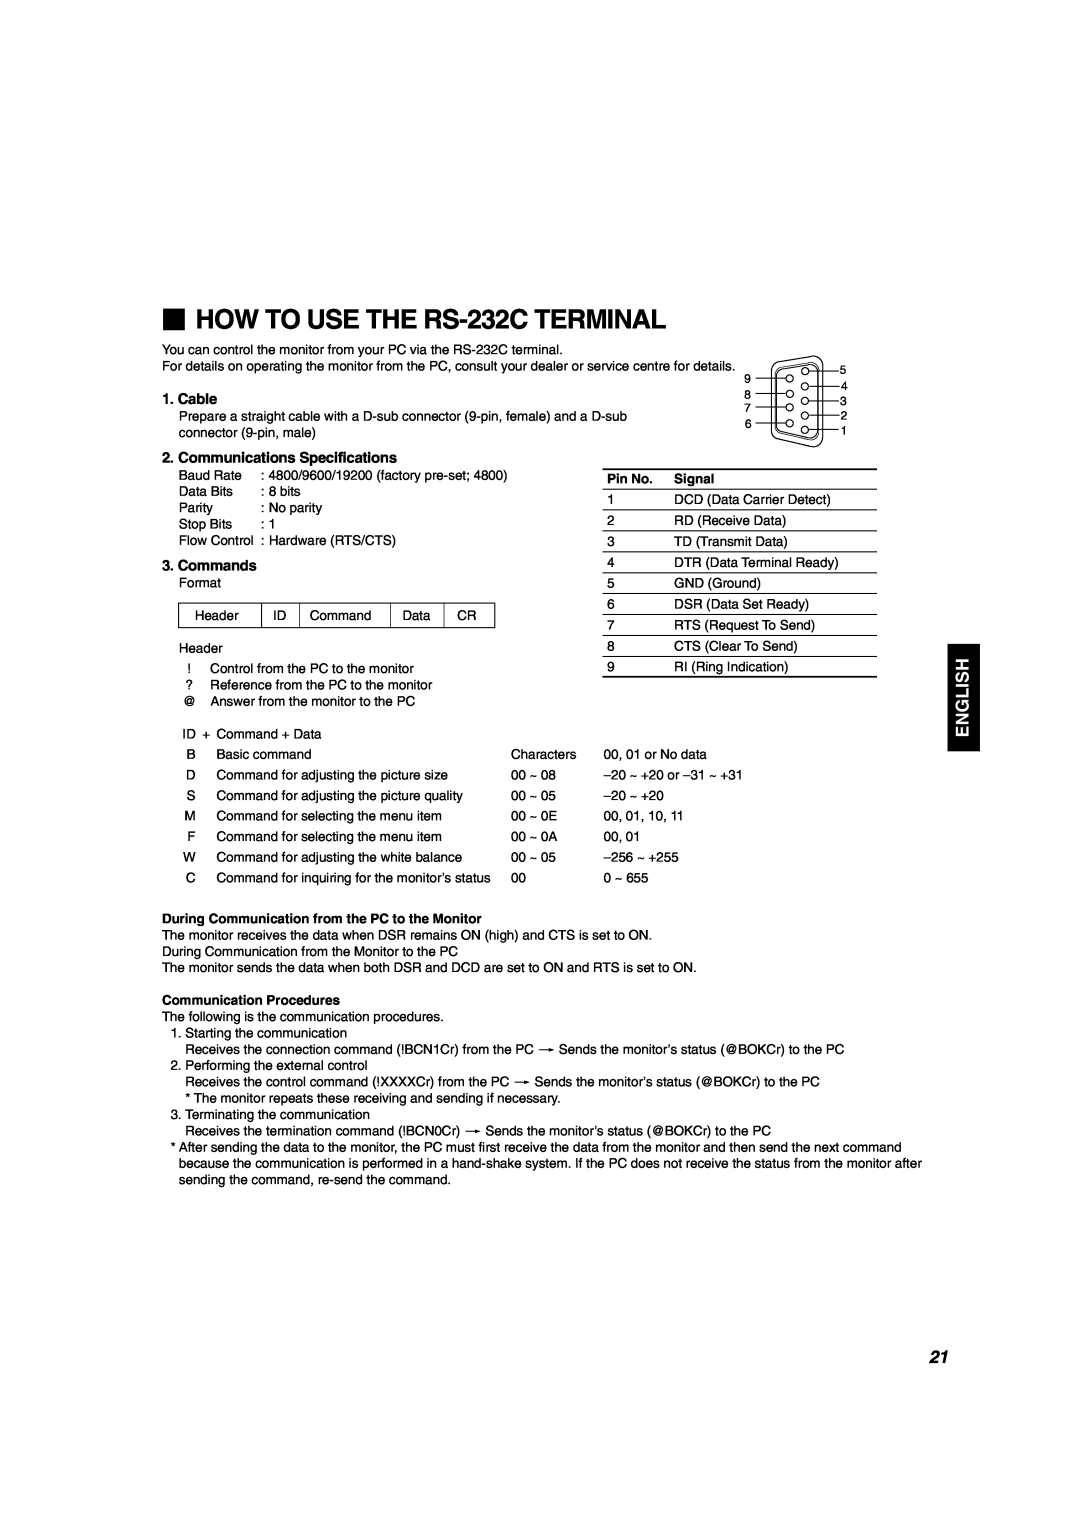 JVC DT-V1900CG manual  HOW TO USE THE RS-232C TERMINAL, English, Cable, Communications Specifications, Commands 